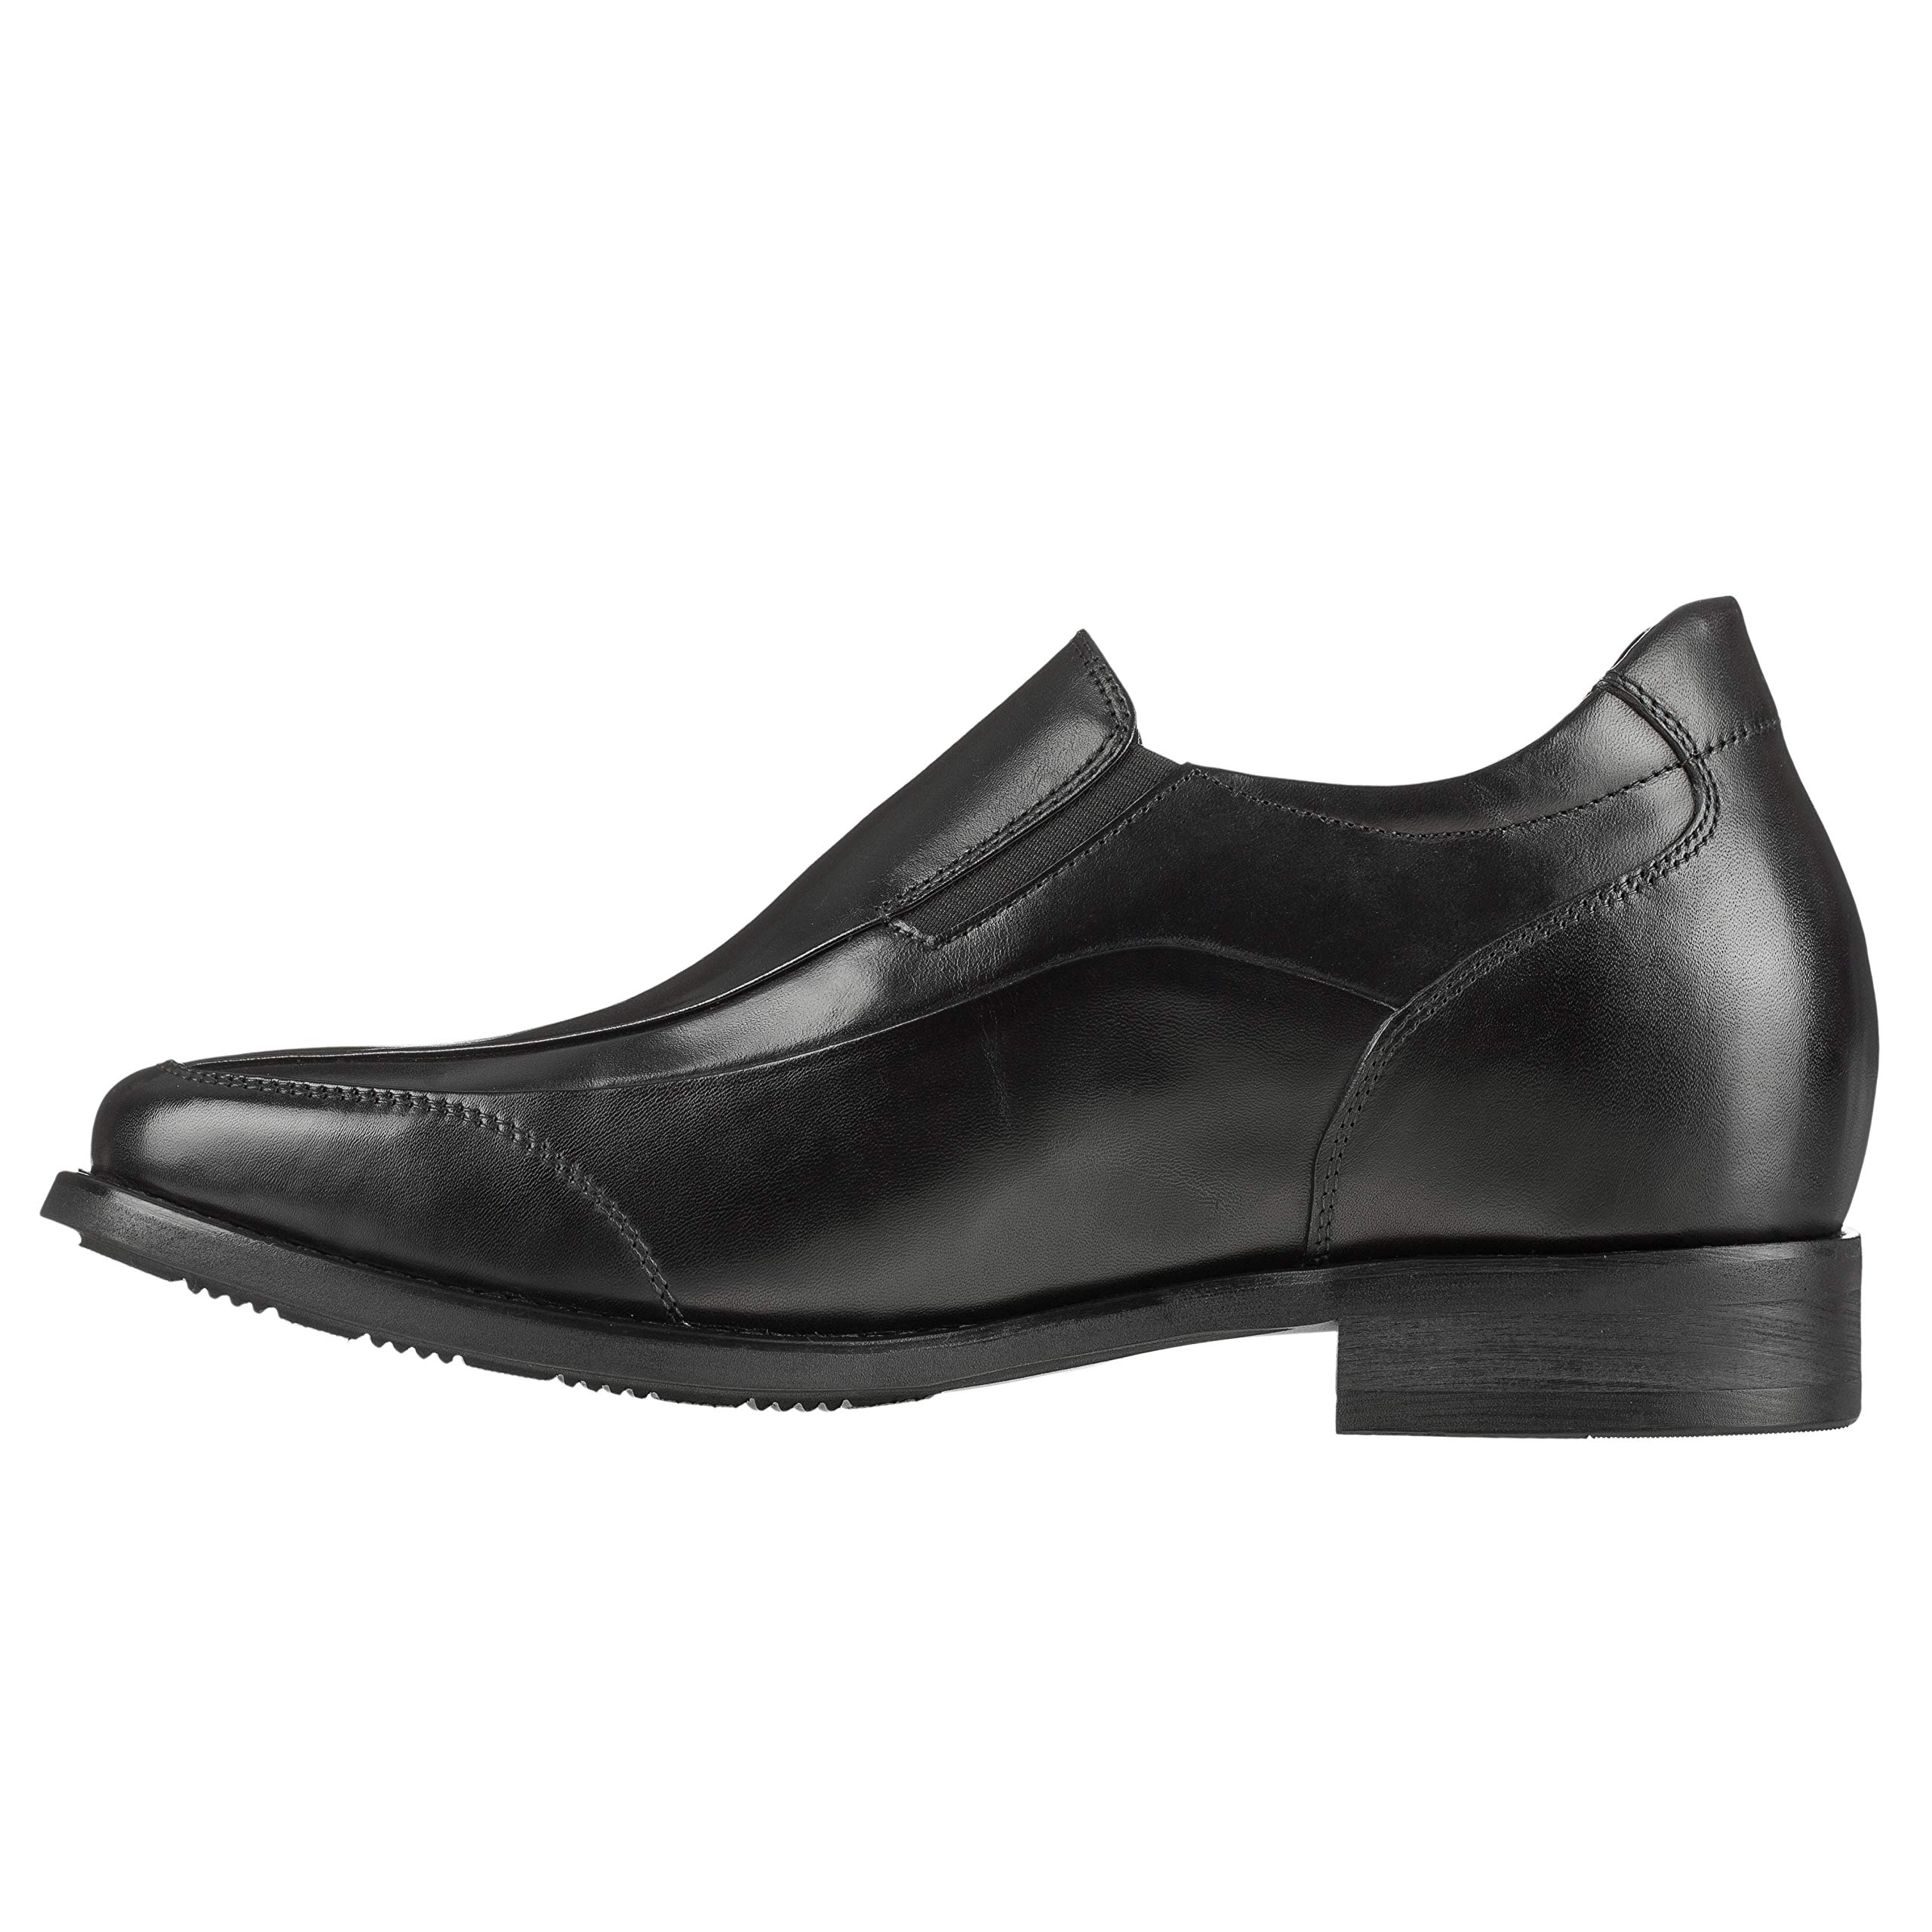 Calden Men's Invisible Height Increasing Elevator Shoes - Black Leather Lightweight Dress Shoes - 3 Inches Taller